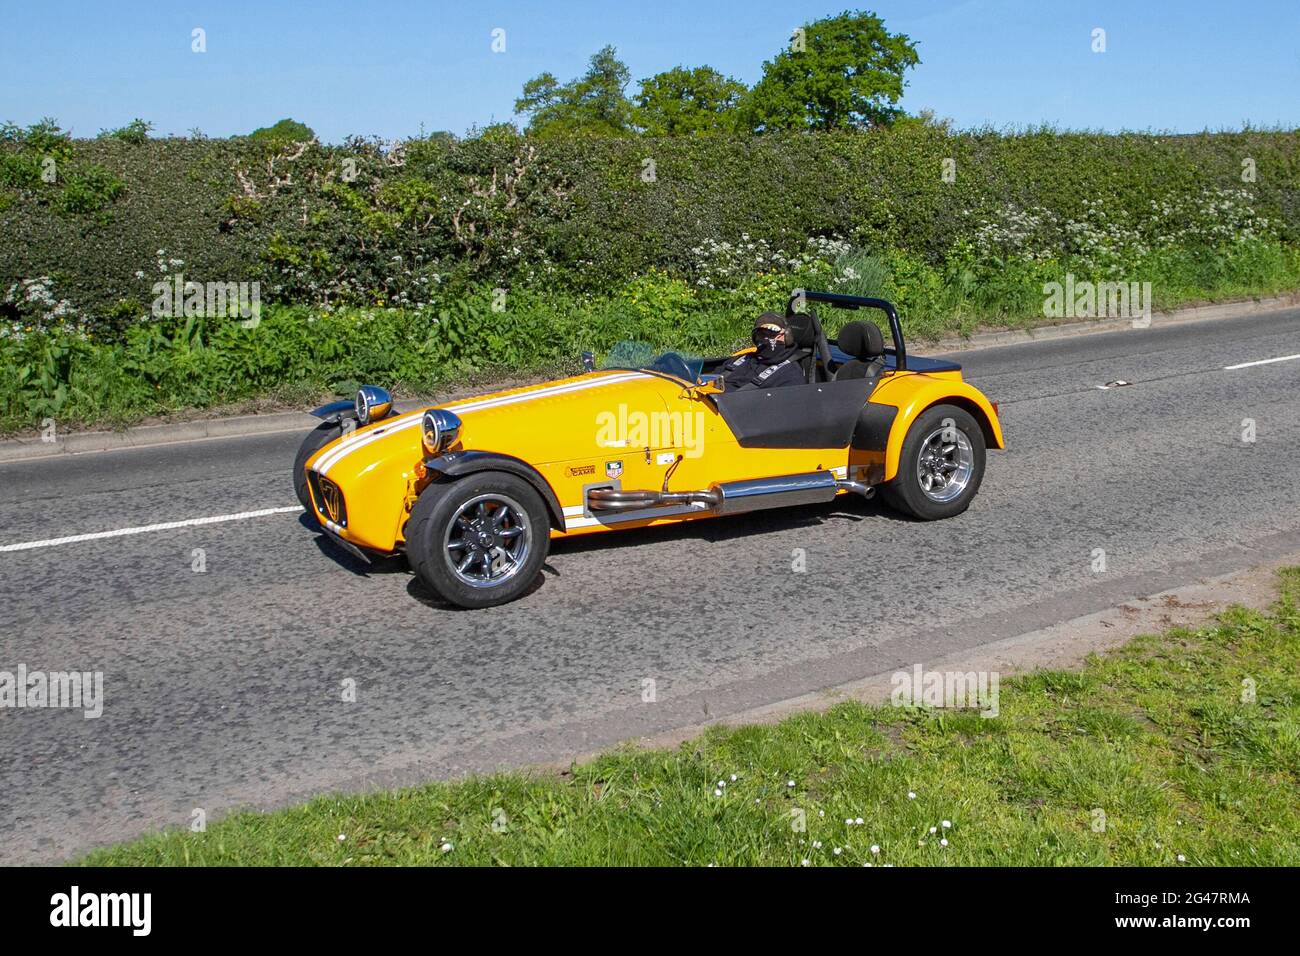 2012 Lowcost yellow Caterham 7 1988cc petrol kit car,  en-route to Capesthorne Hall classic May car show, Cheshire, UK Stock Photo